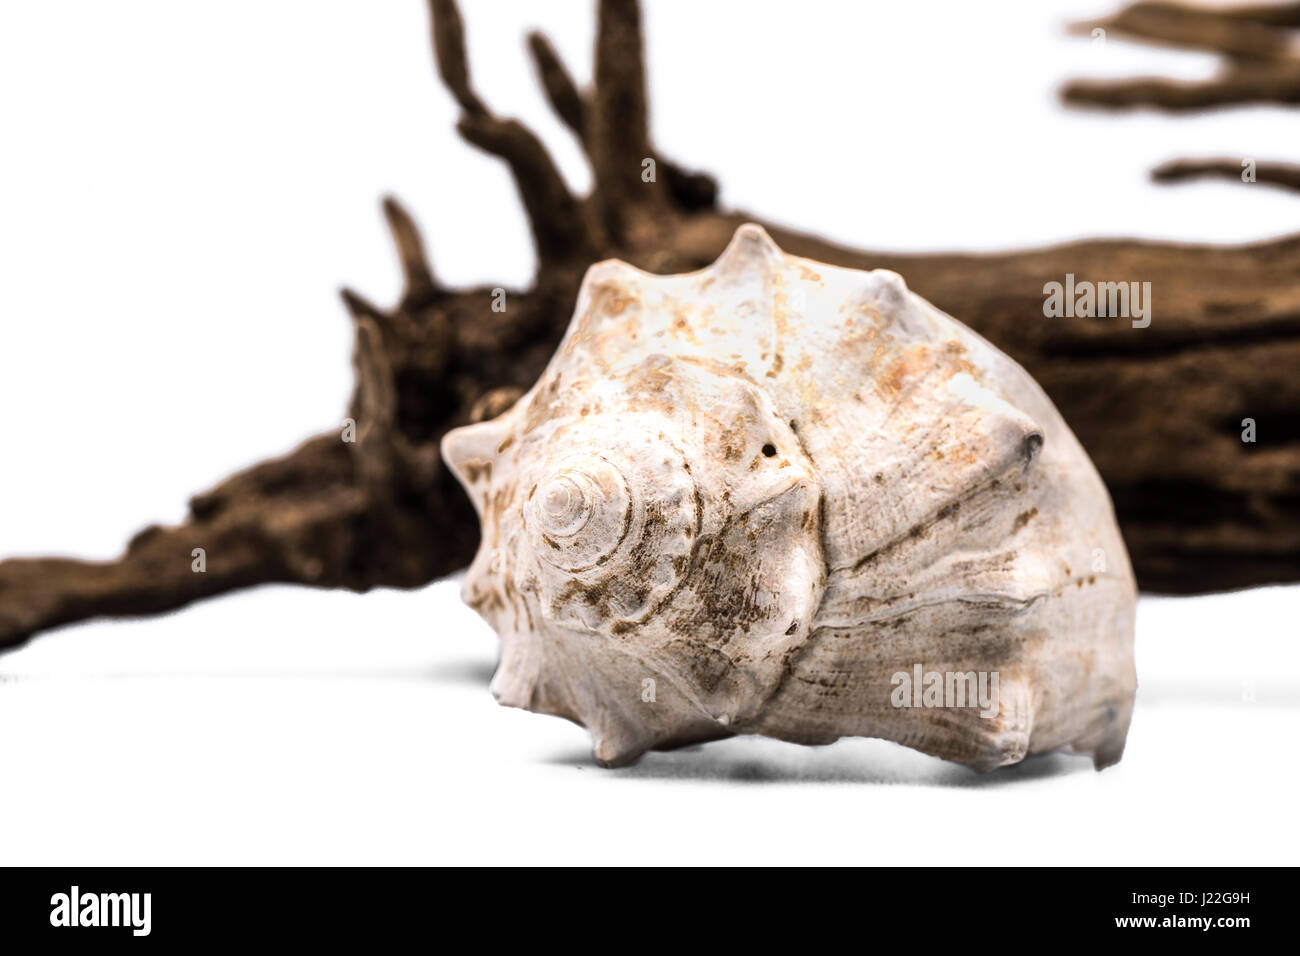 Sea shell and driftwood on white background. Stock Photo